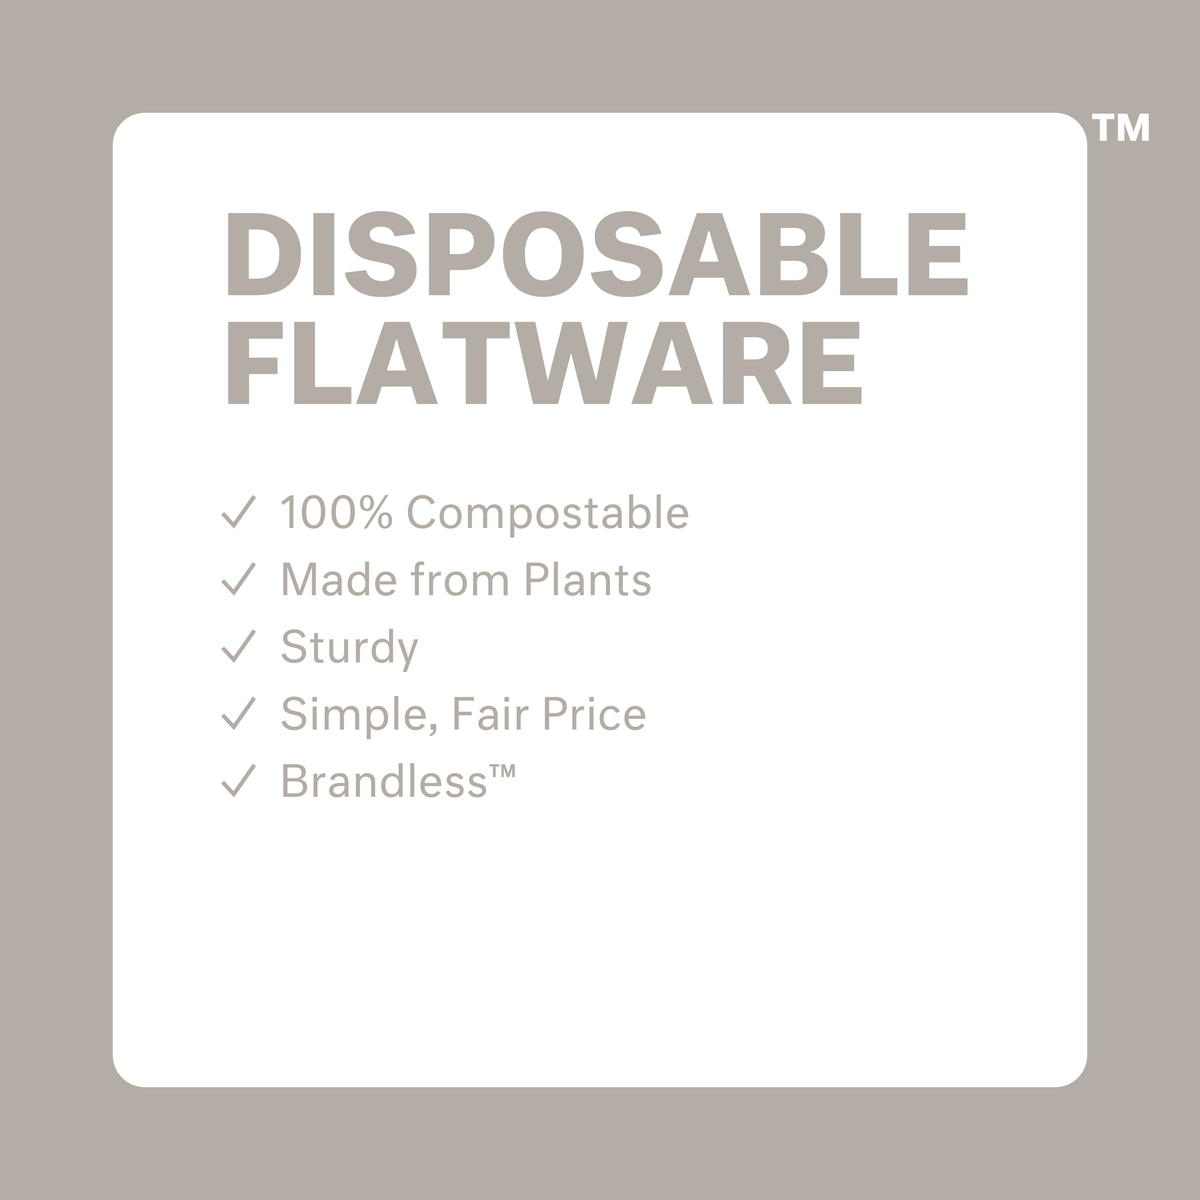 Disposable flatware: 100% compostable, made from plants, sturdy, simple fair price, brandless.